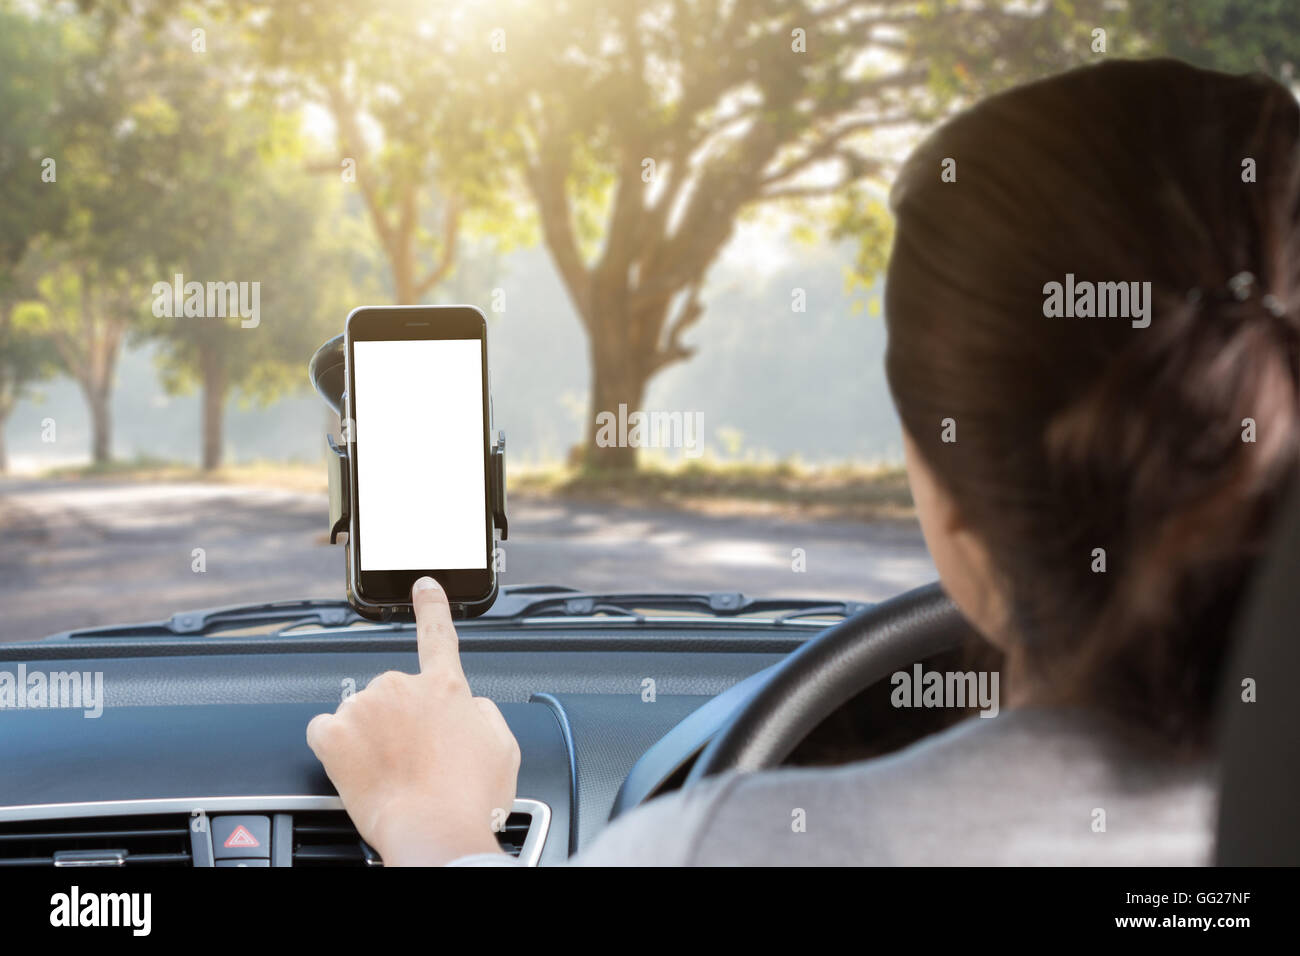 woman use phone mount to glass in car on rural road Stock Photo